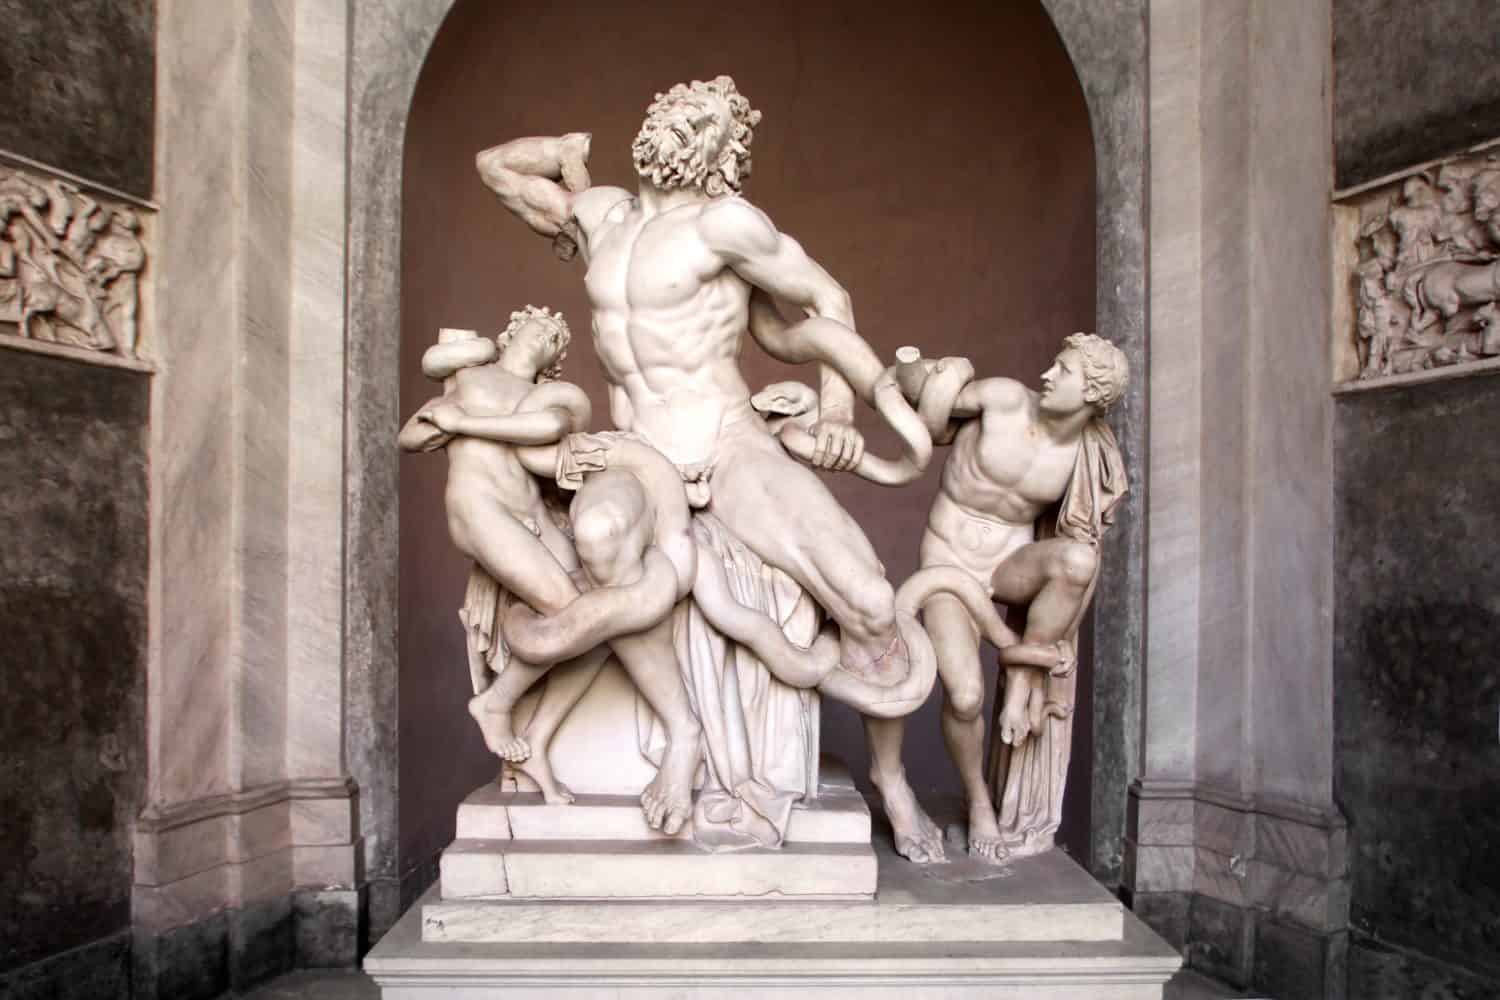 The Laocoon group: famous sculpture at the Vatican / Italy